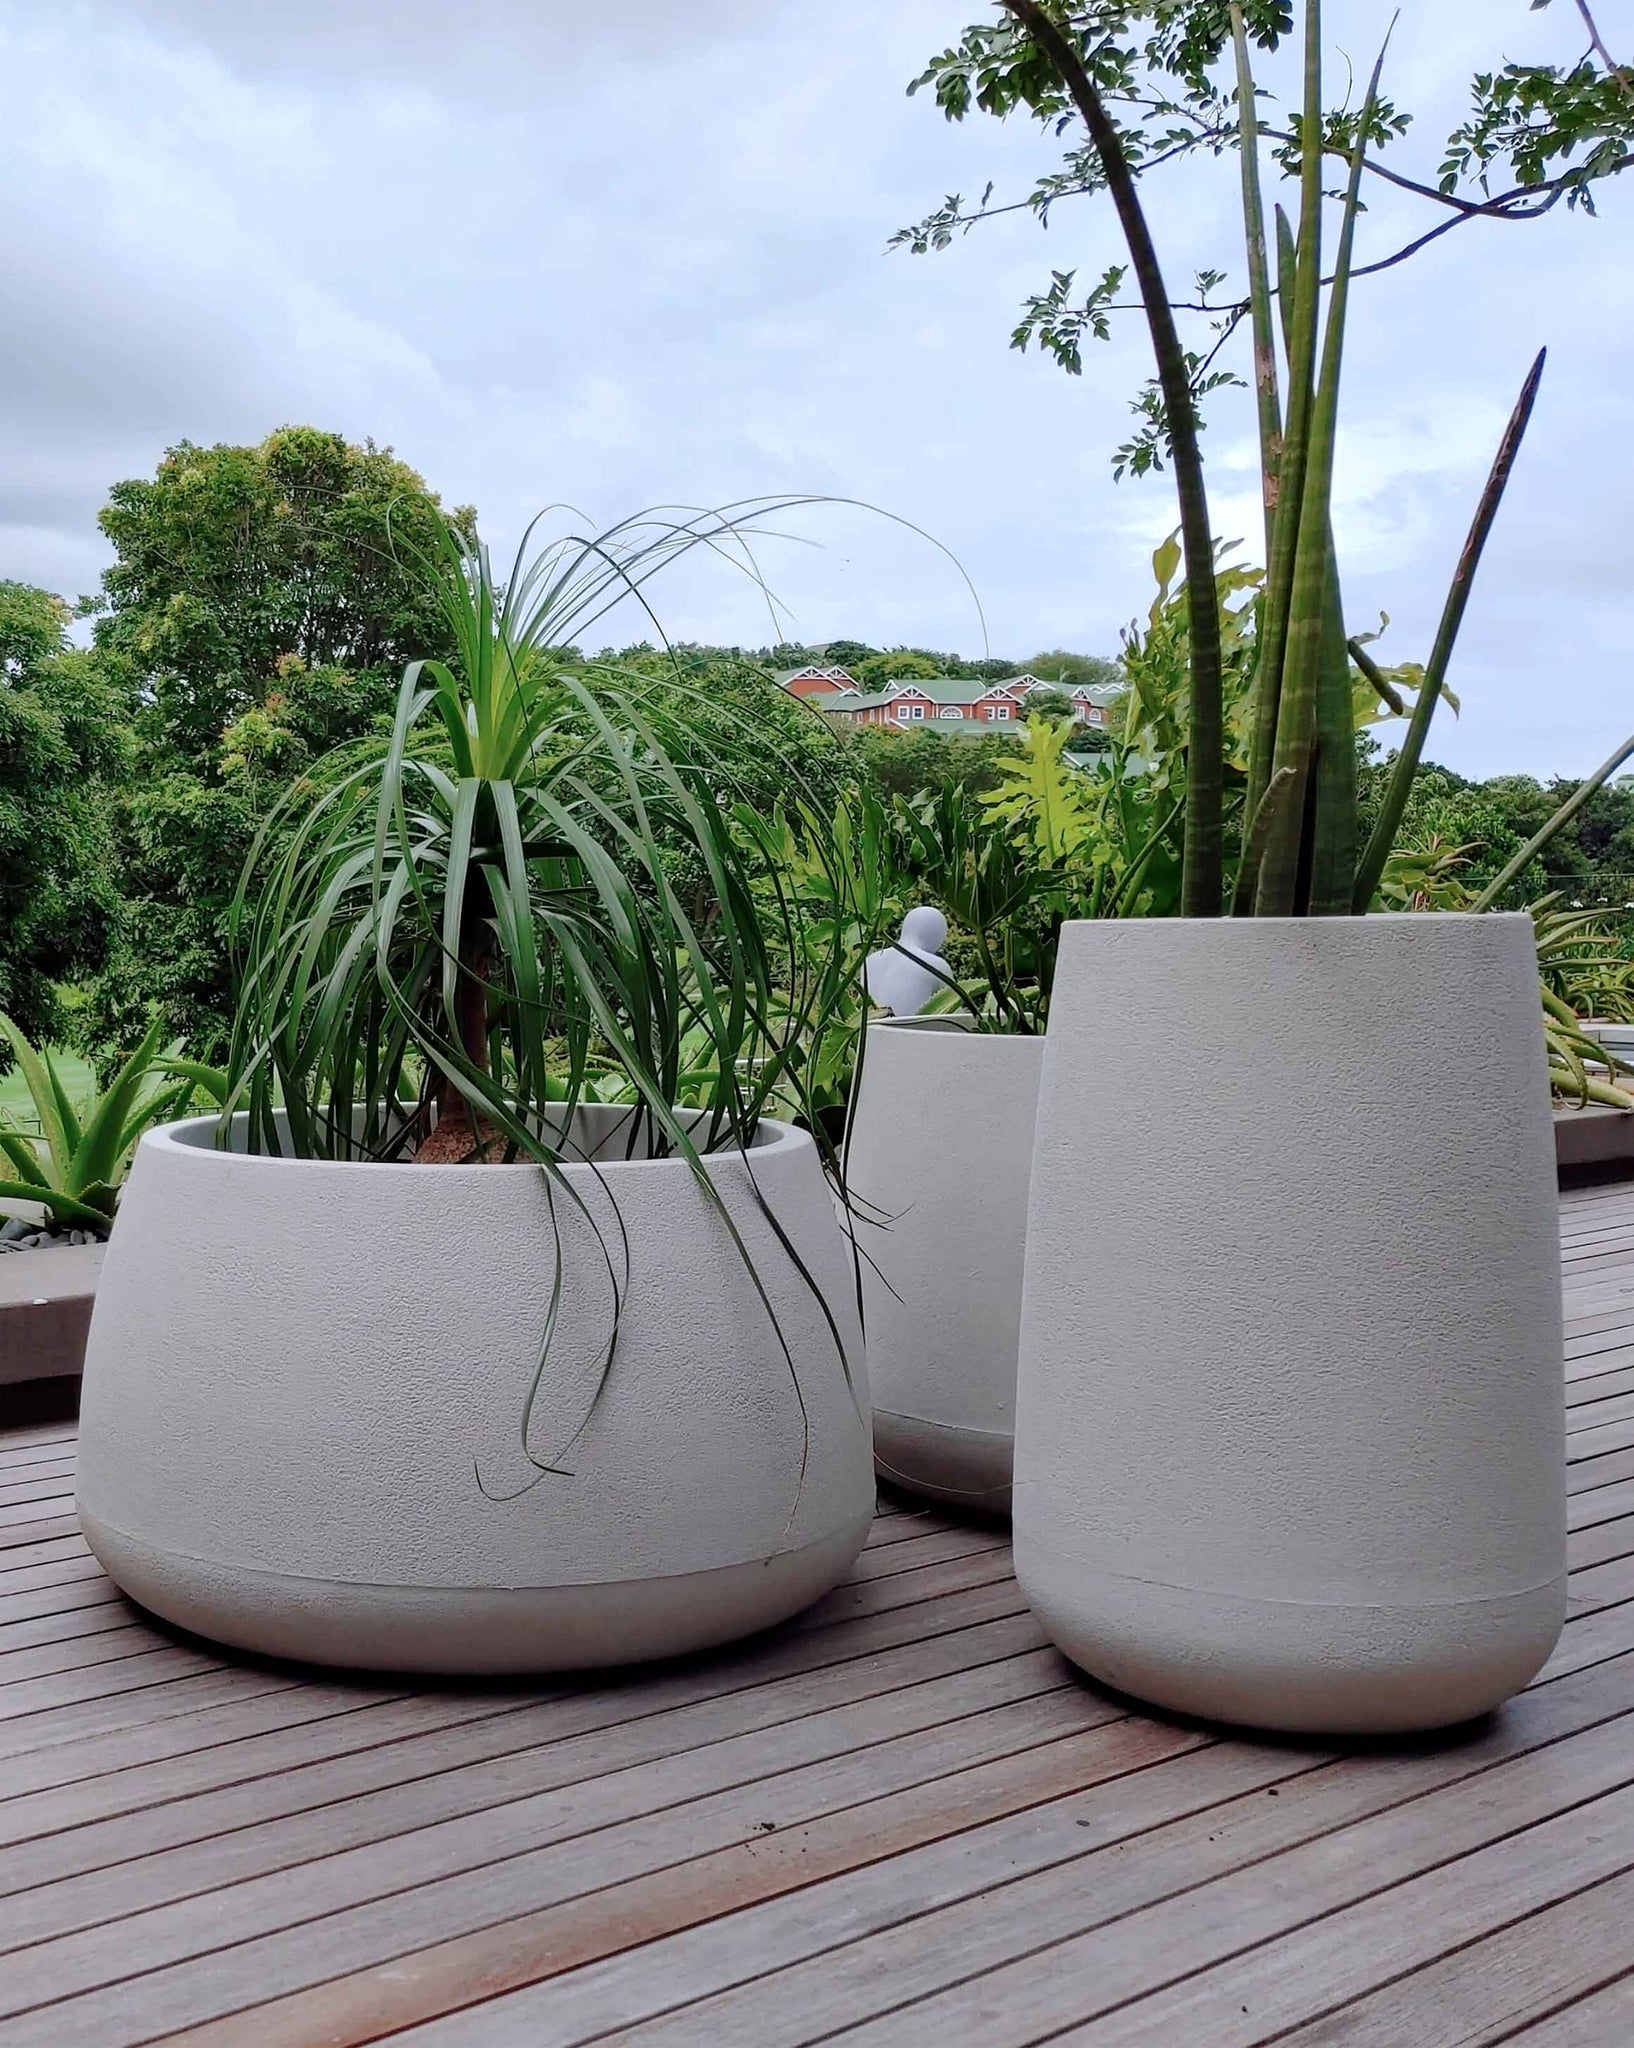 Set of 3 Bio planters, low, medium and tall, all with plants planted in them on the deck in a beautiful  home setting 